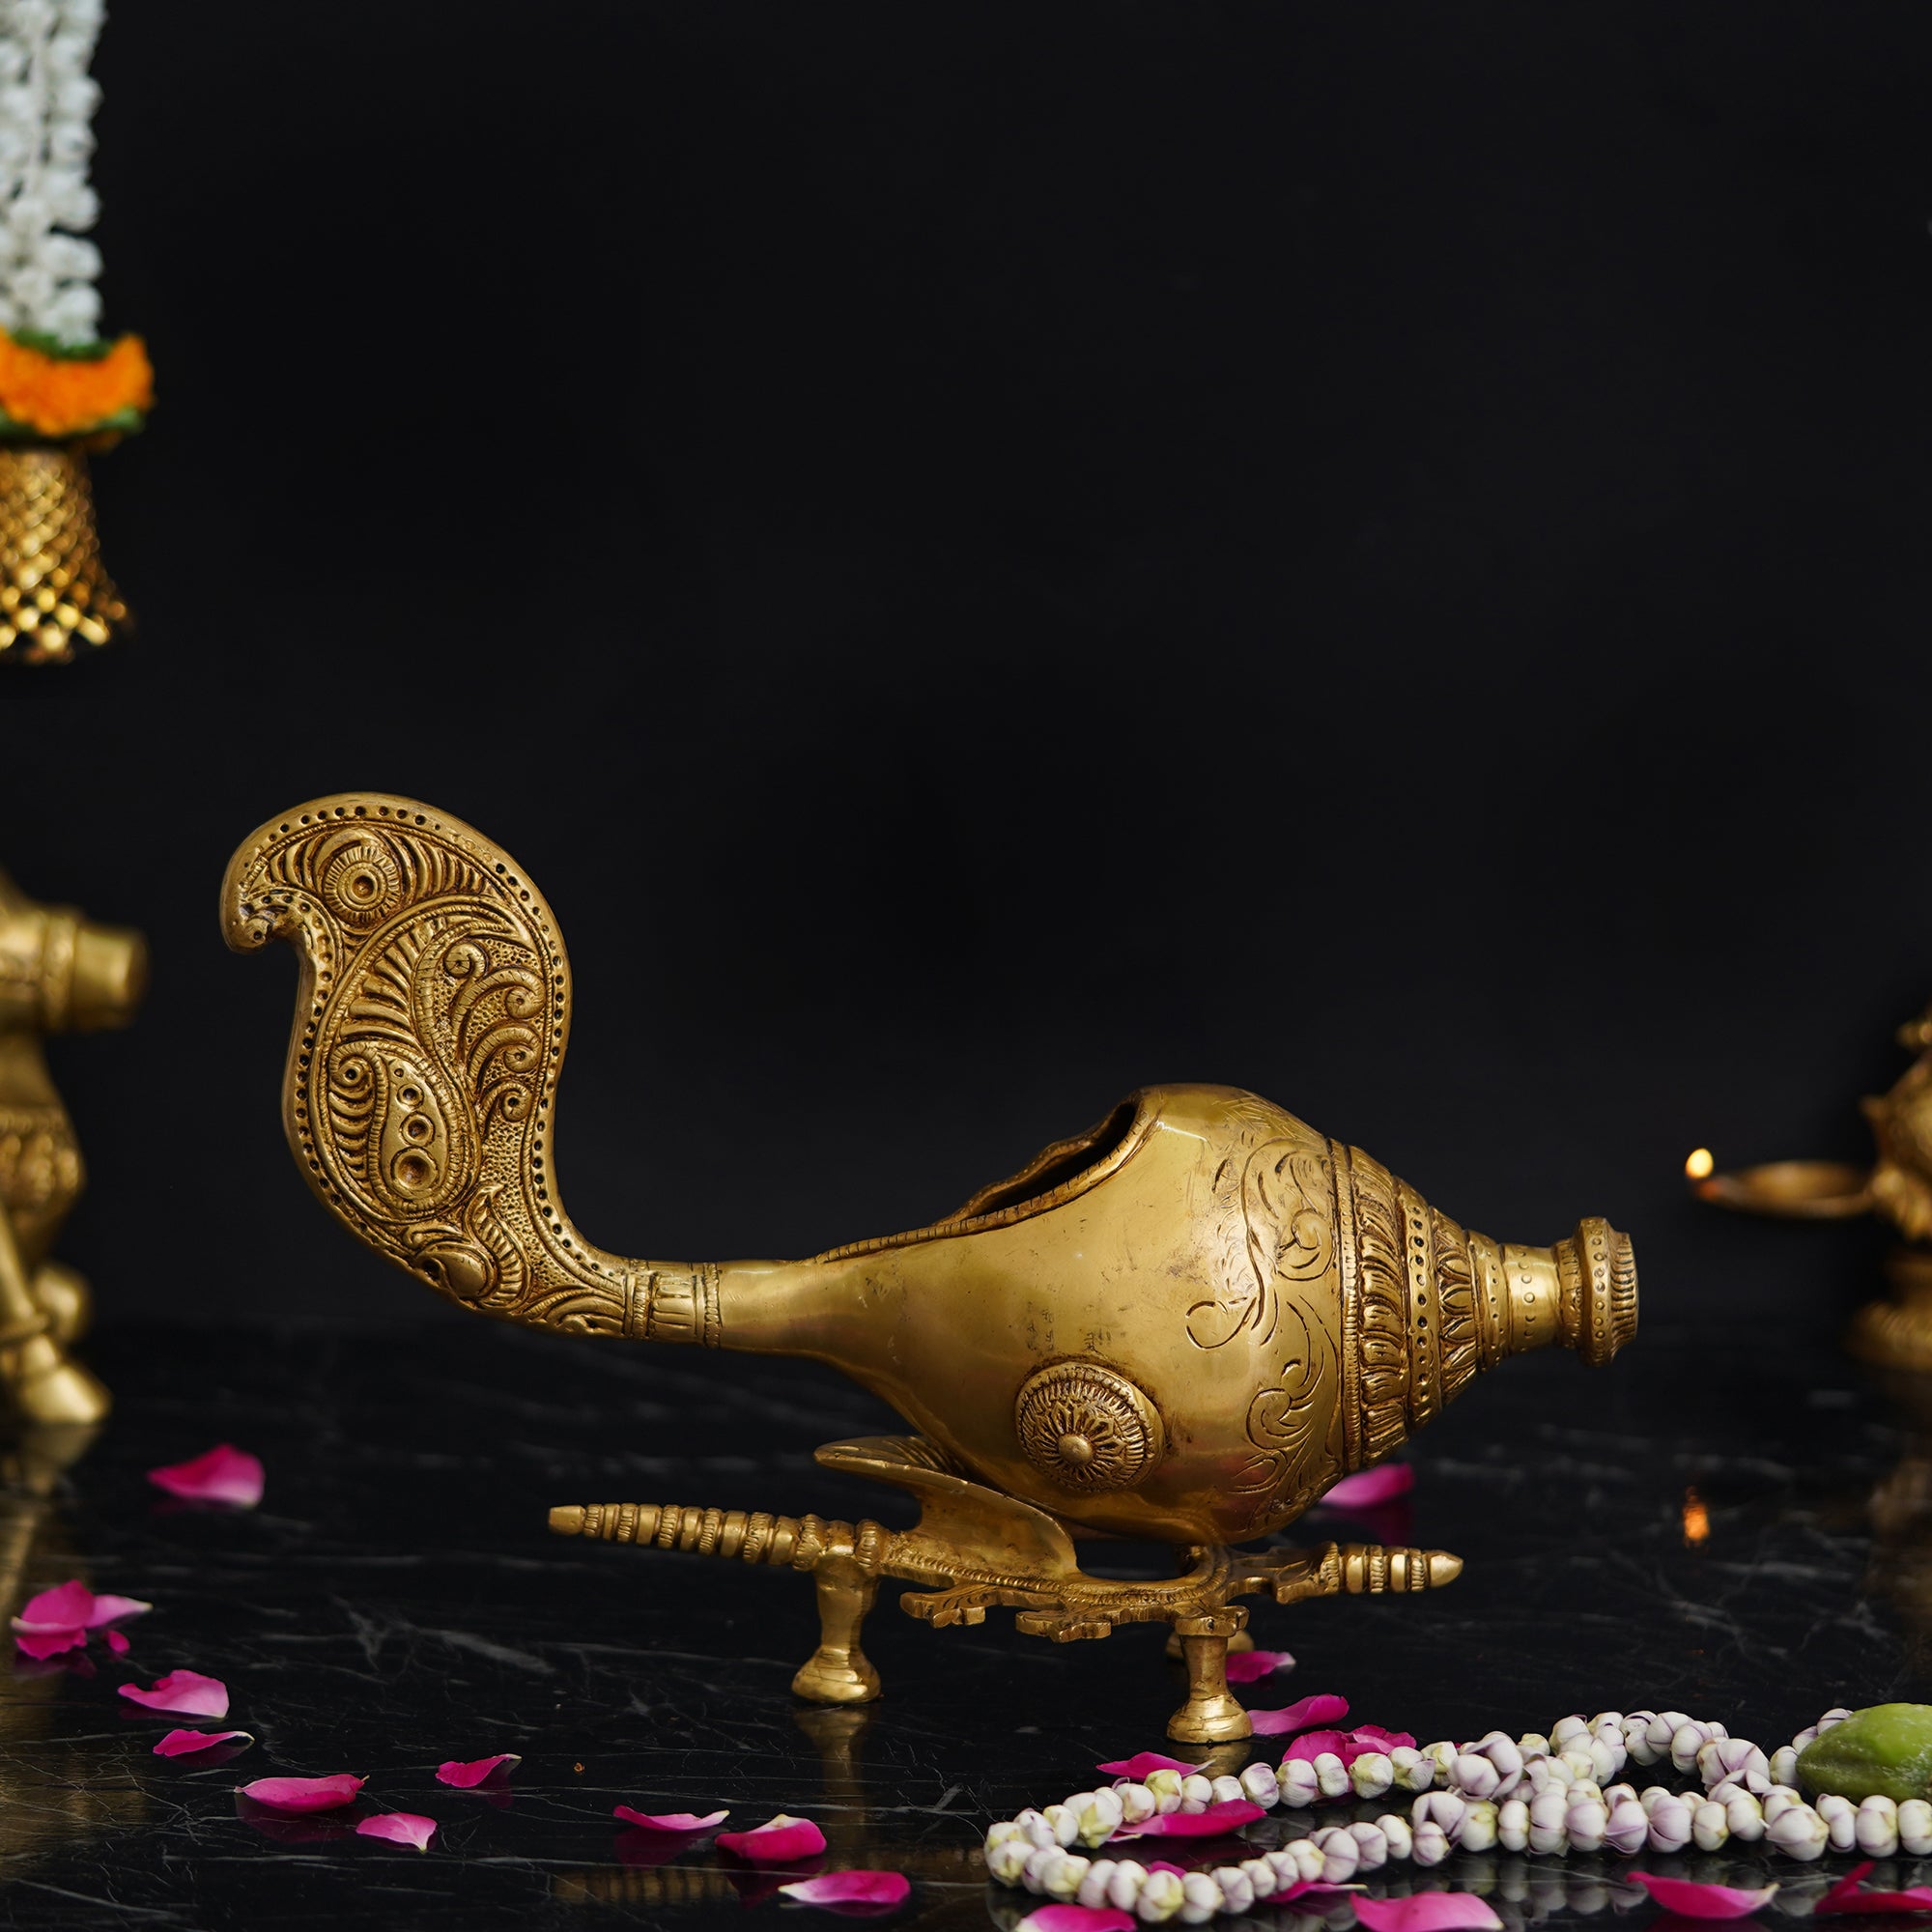 Golden Shankh (Conch) with a Stand Decorative Handcrafted Brass Showpiece 6